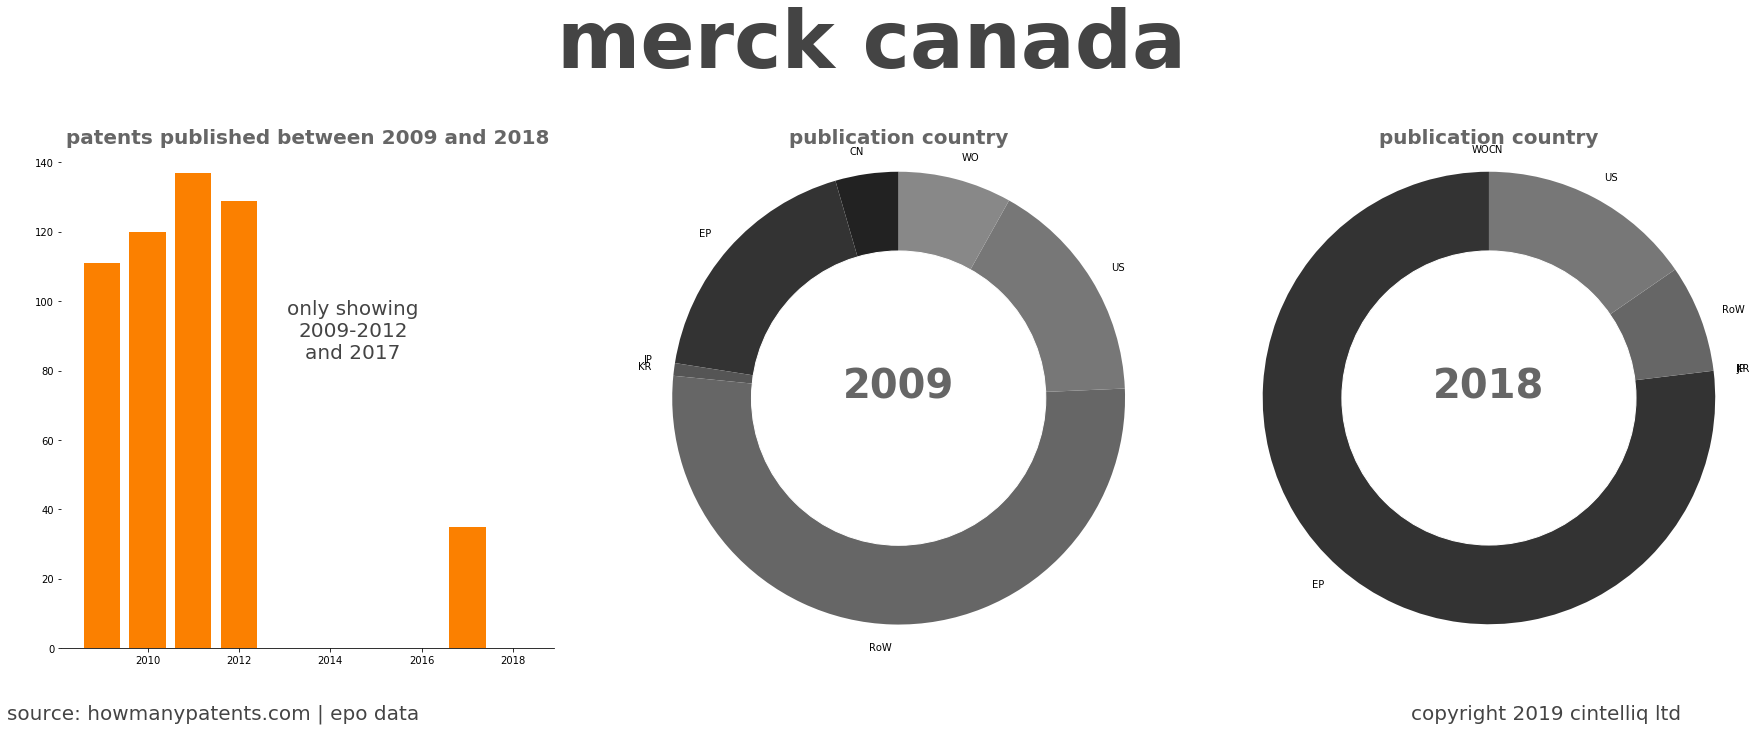 summary of patents for Merck Canada